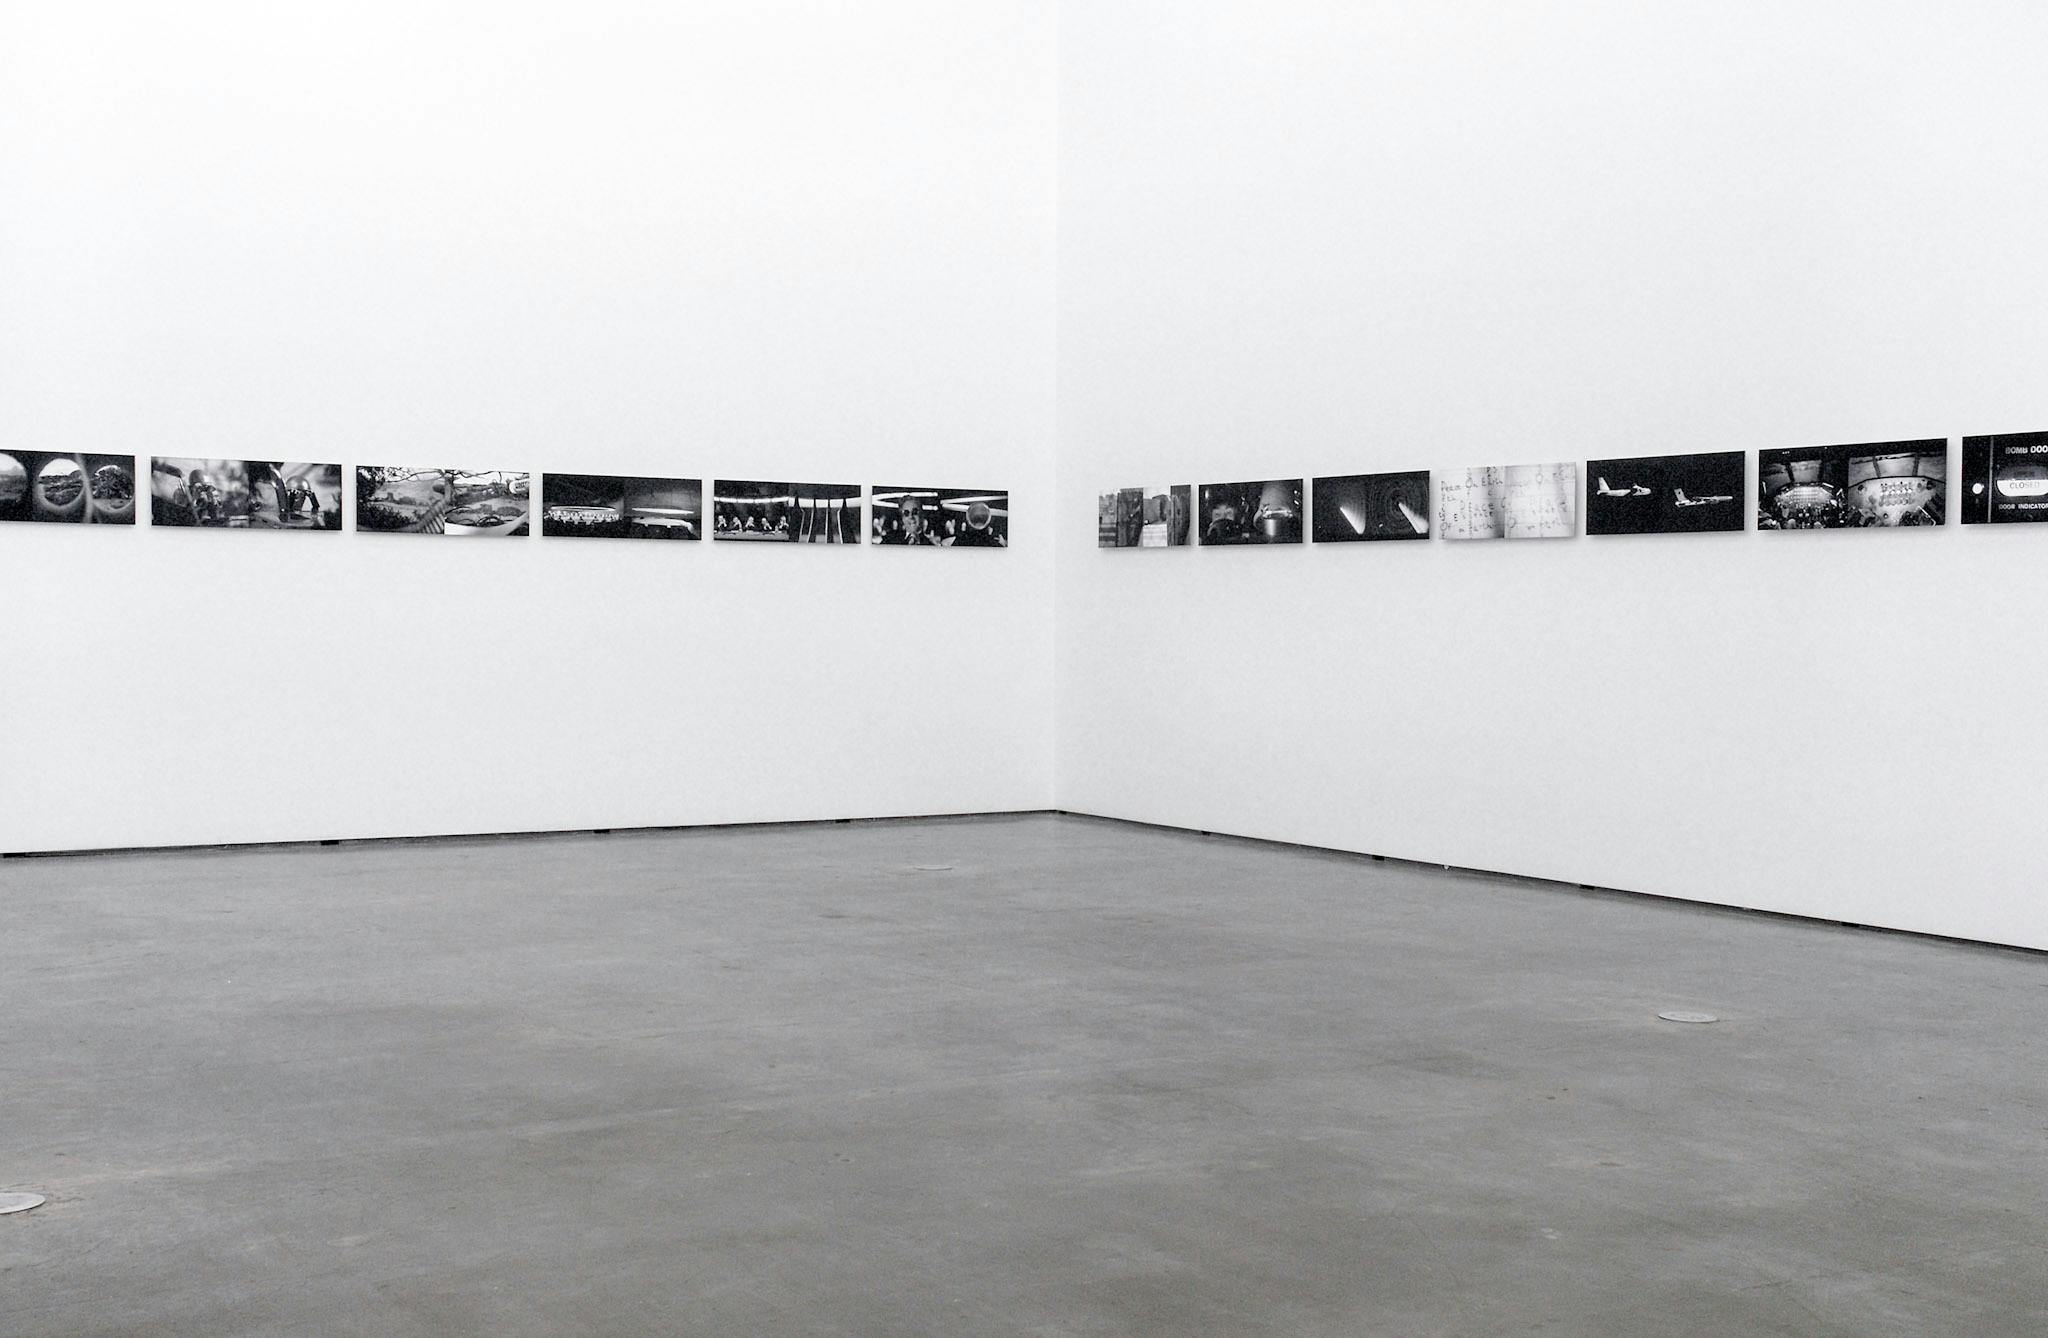 A number of same-sized black and white photographs are installed on the gallery walls. Two similar images are paired and exhibited side by side. Some of those images depict cityscapes.